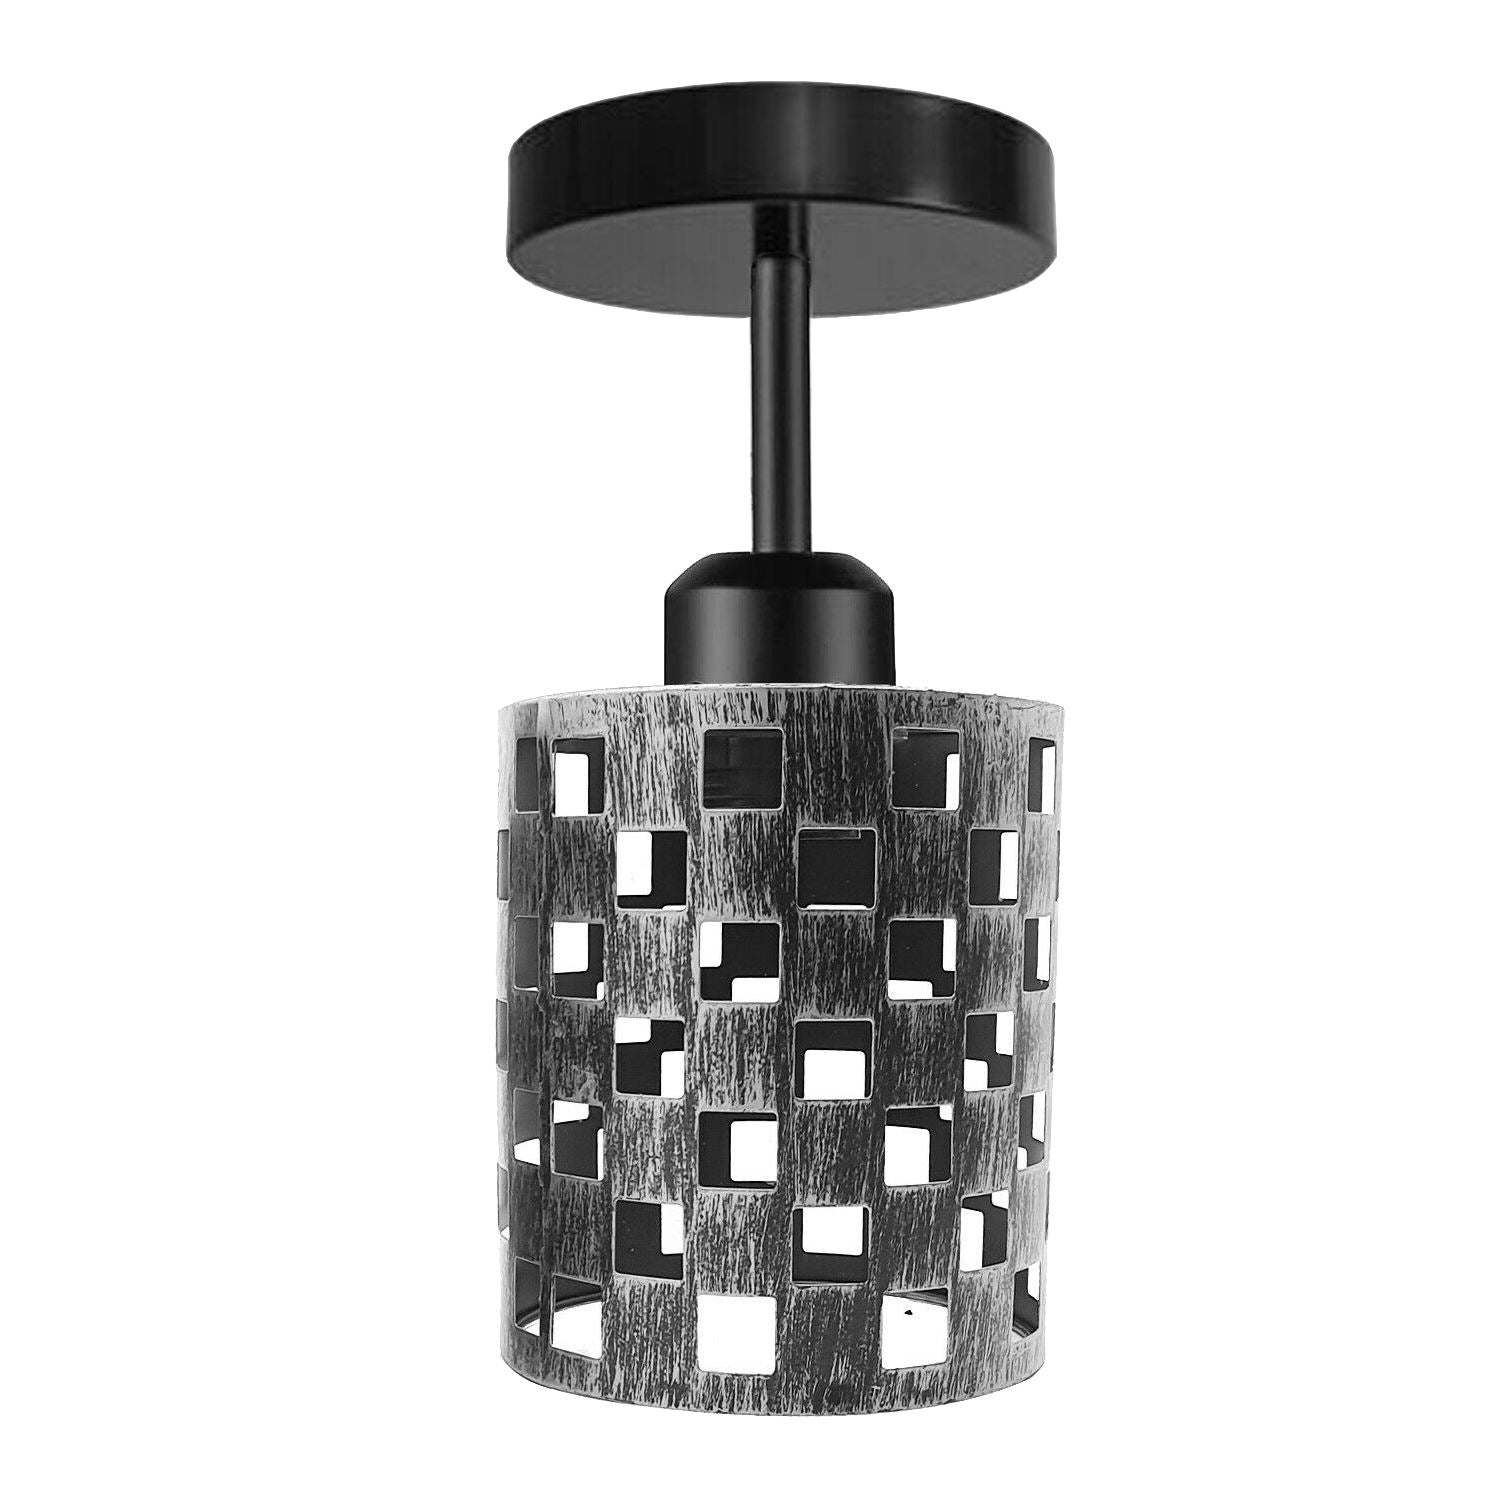 New Modern Industrial Indoor Metal Ceiling Light E27 Pendant Lamp with Cage